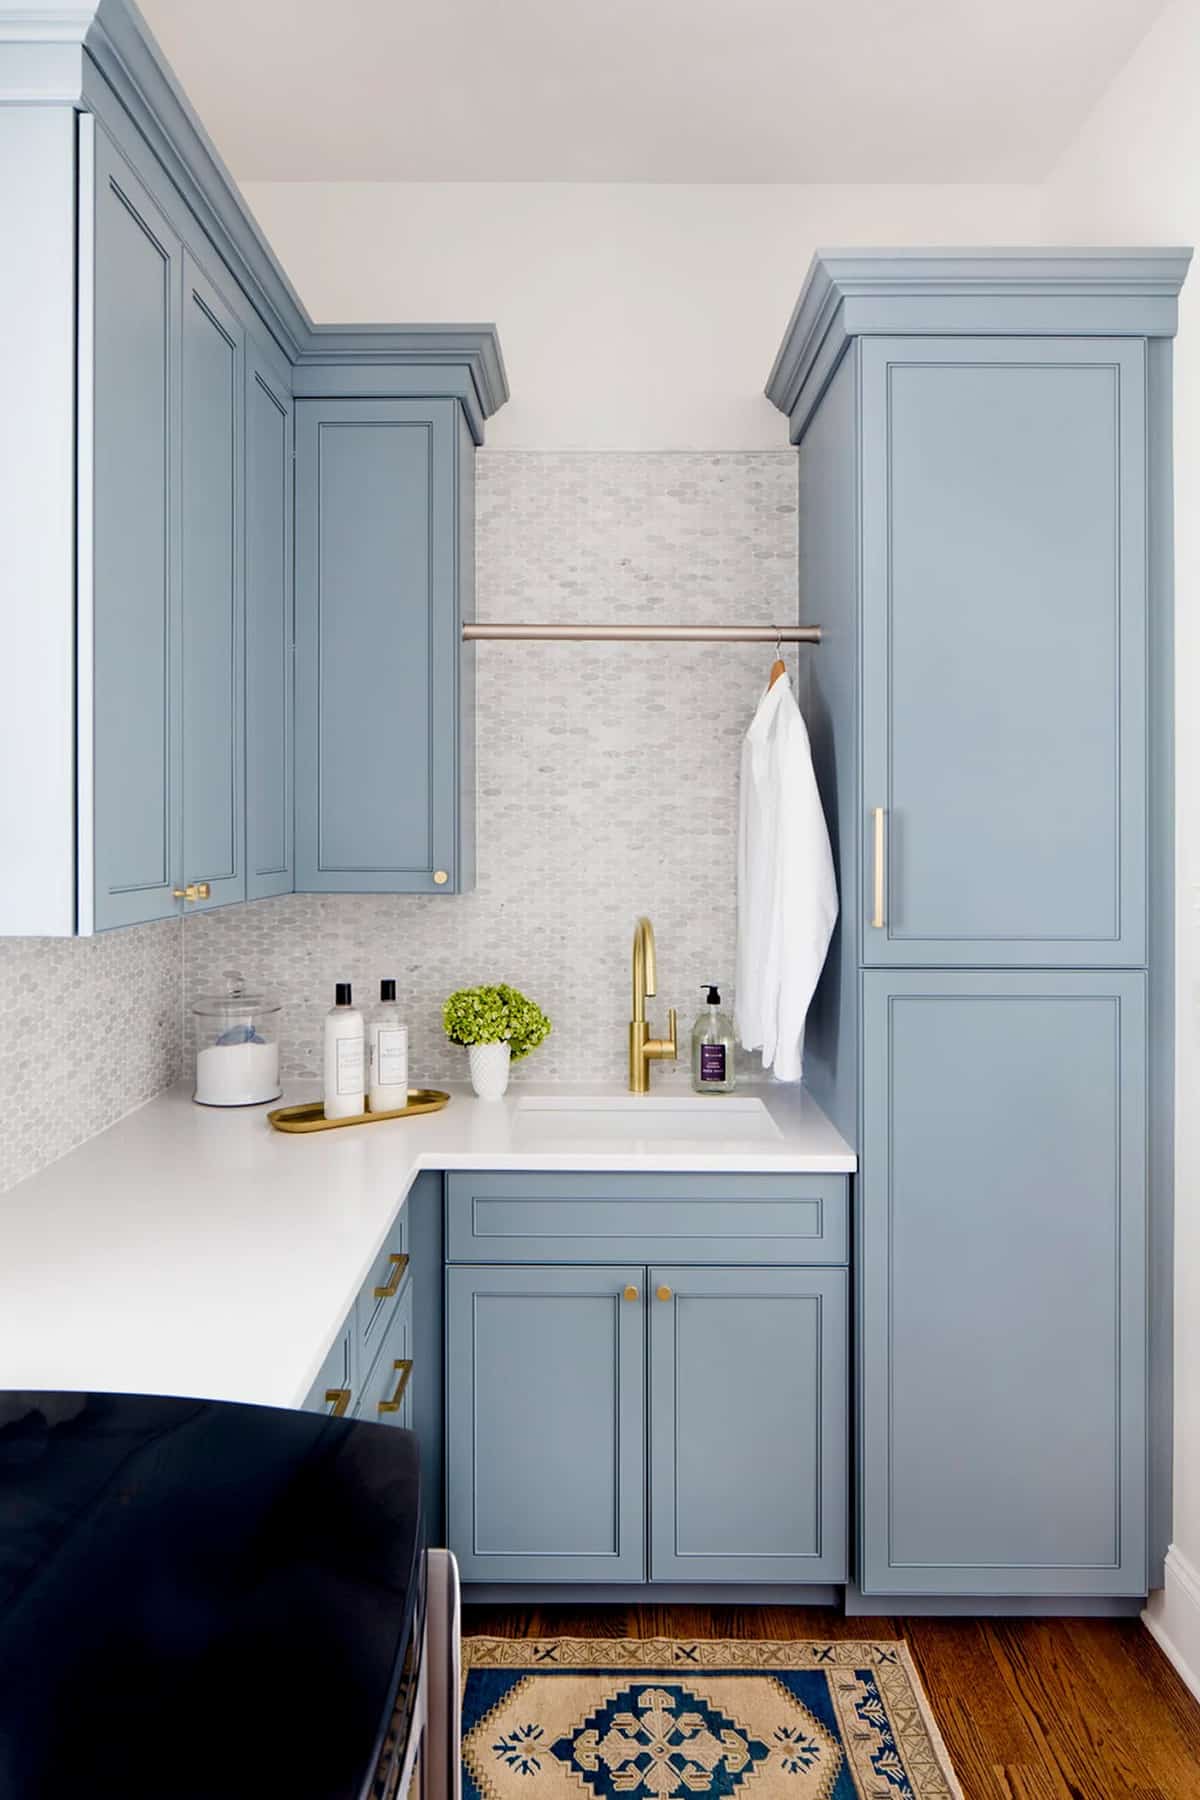 Modern laundry room Benjamin Moore Van Courtland Blue cabinets. Brass hardware and white countertops and backsplash.